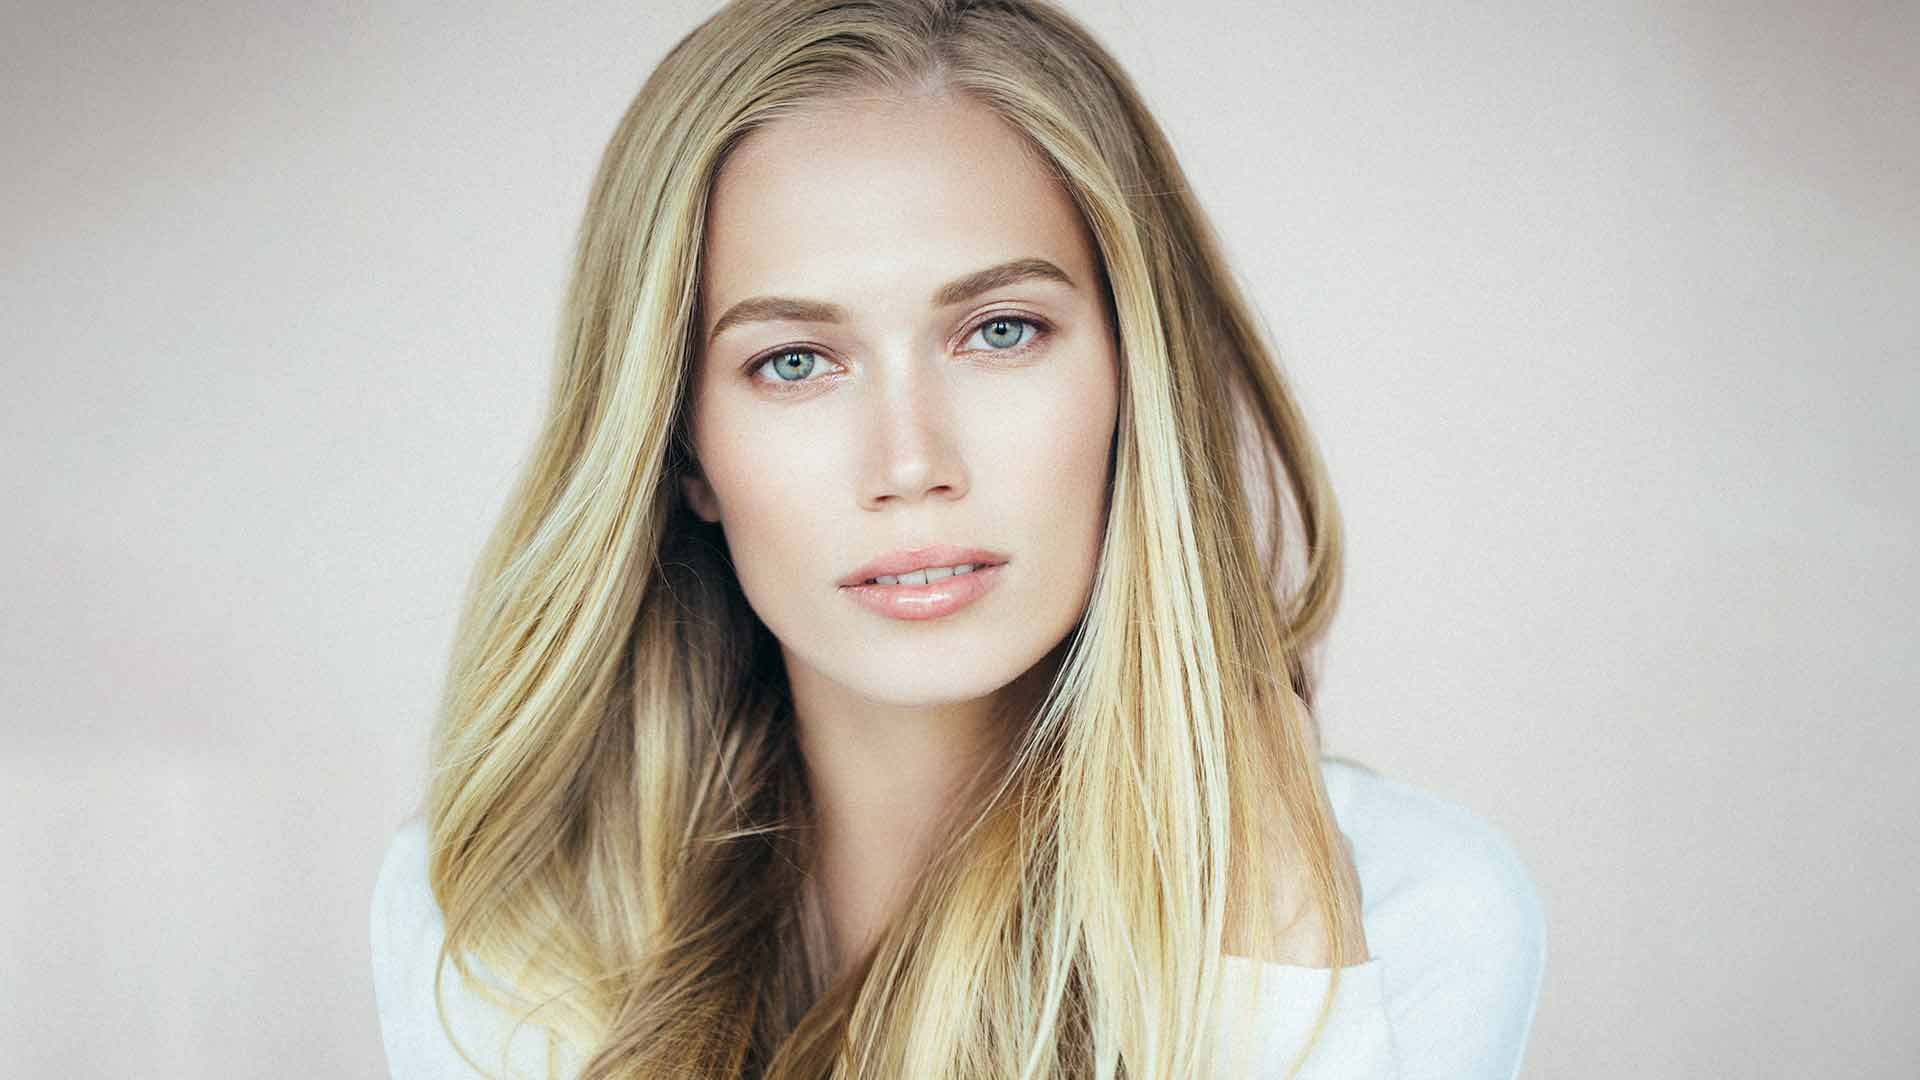 Loreal Paris Article How To Make Your Hair Blonder in 15 Minutes Or Less D